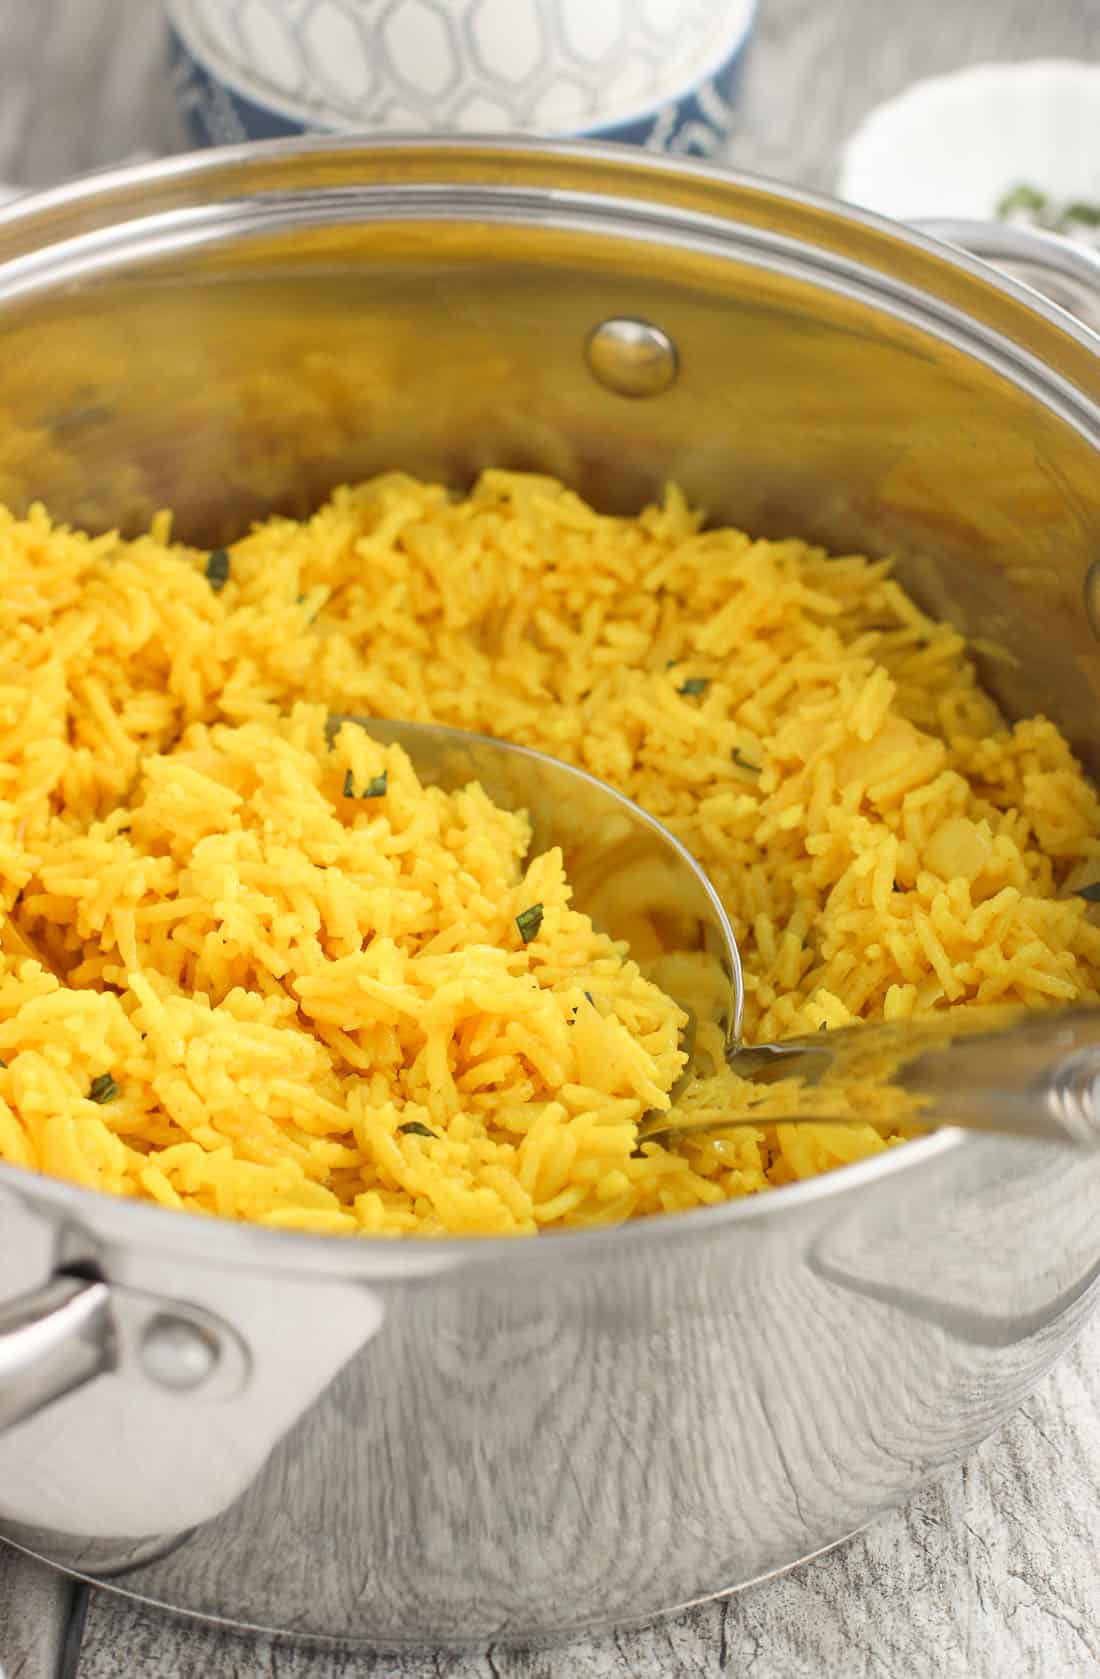 This turmeric coconut basmati rice is a flavorful, creamy rice side dish recipe that's easy to make!